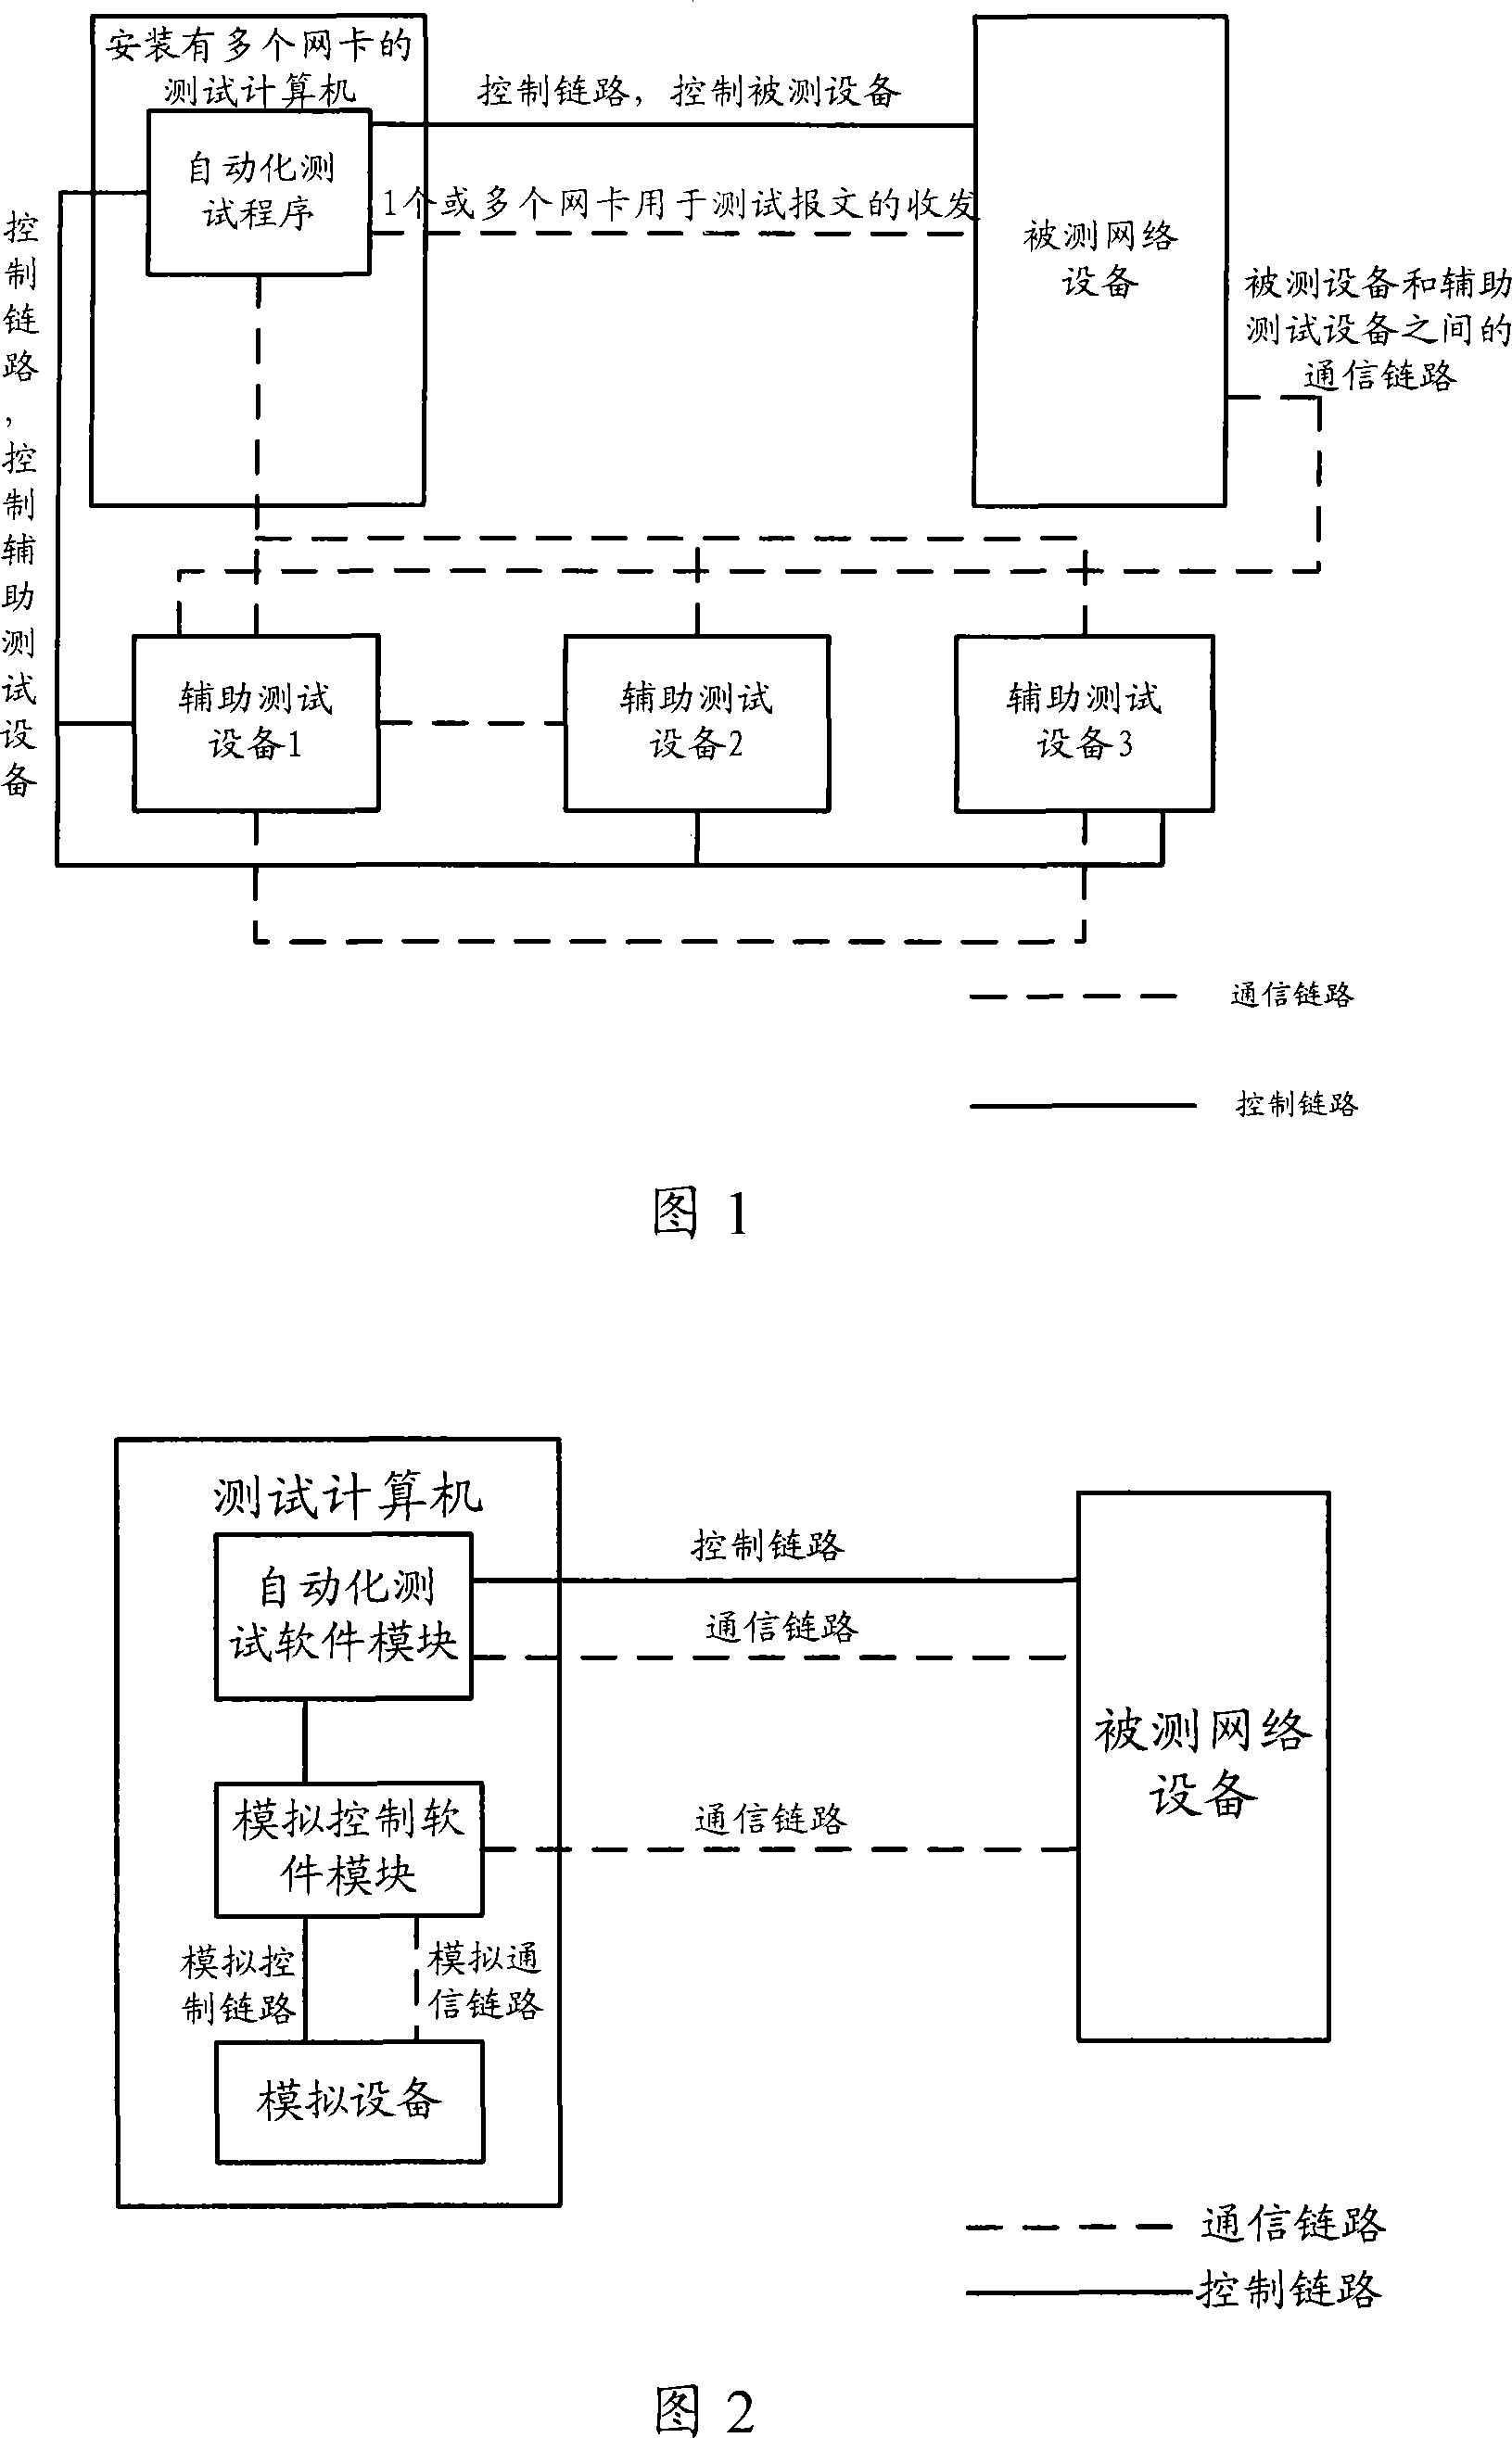 Network appliance testing approach and device